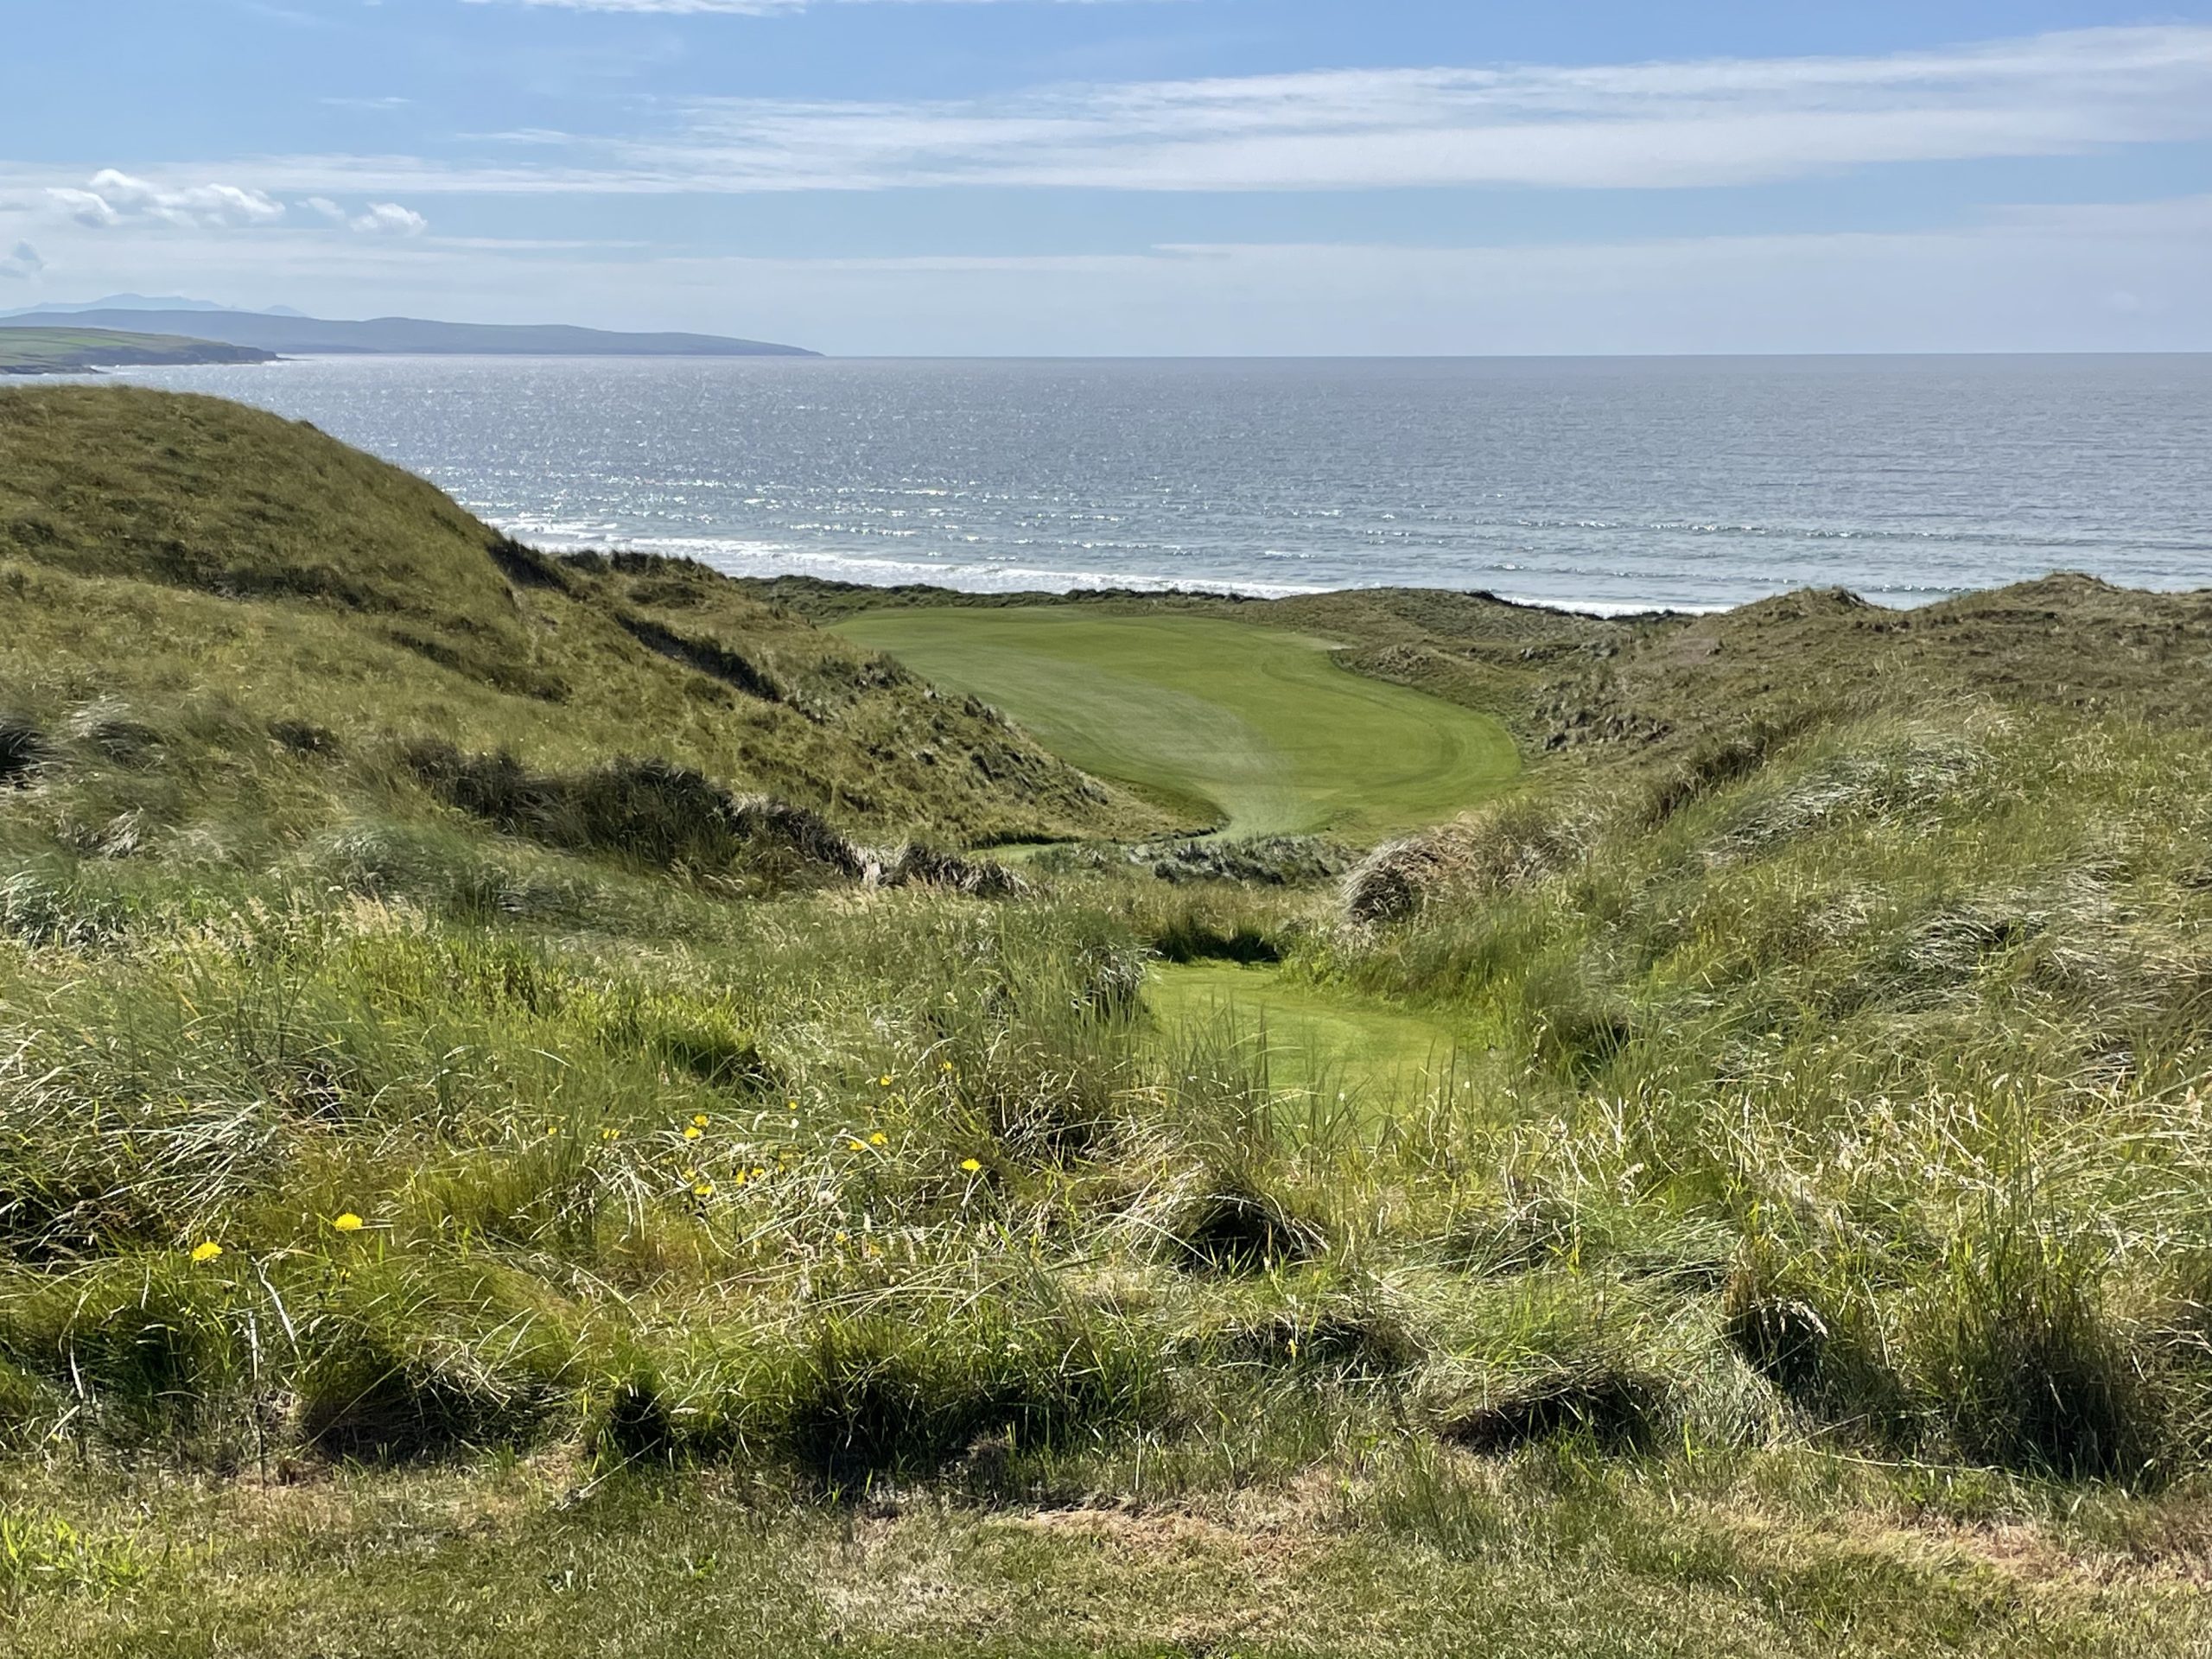 View from the 17th tee on Ballybunion Old Course in County Kerry, Ireland.